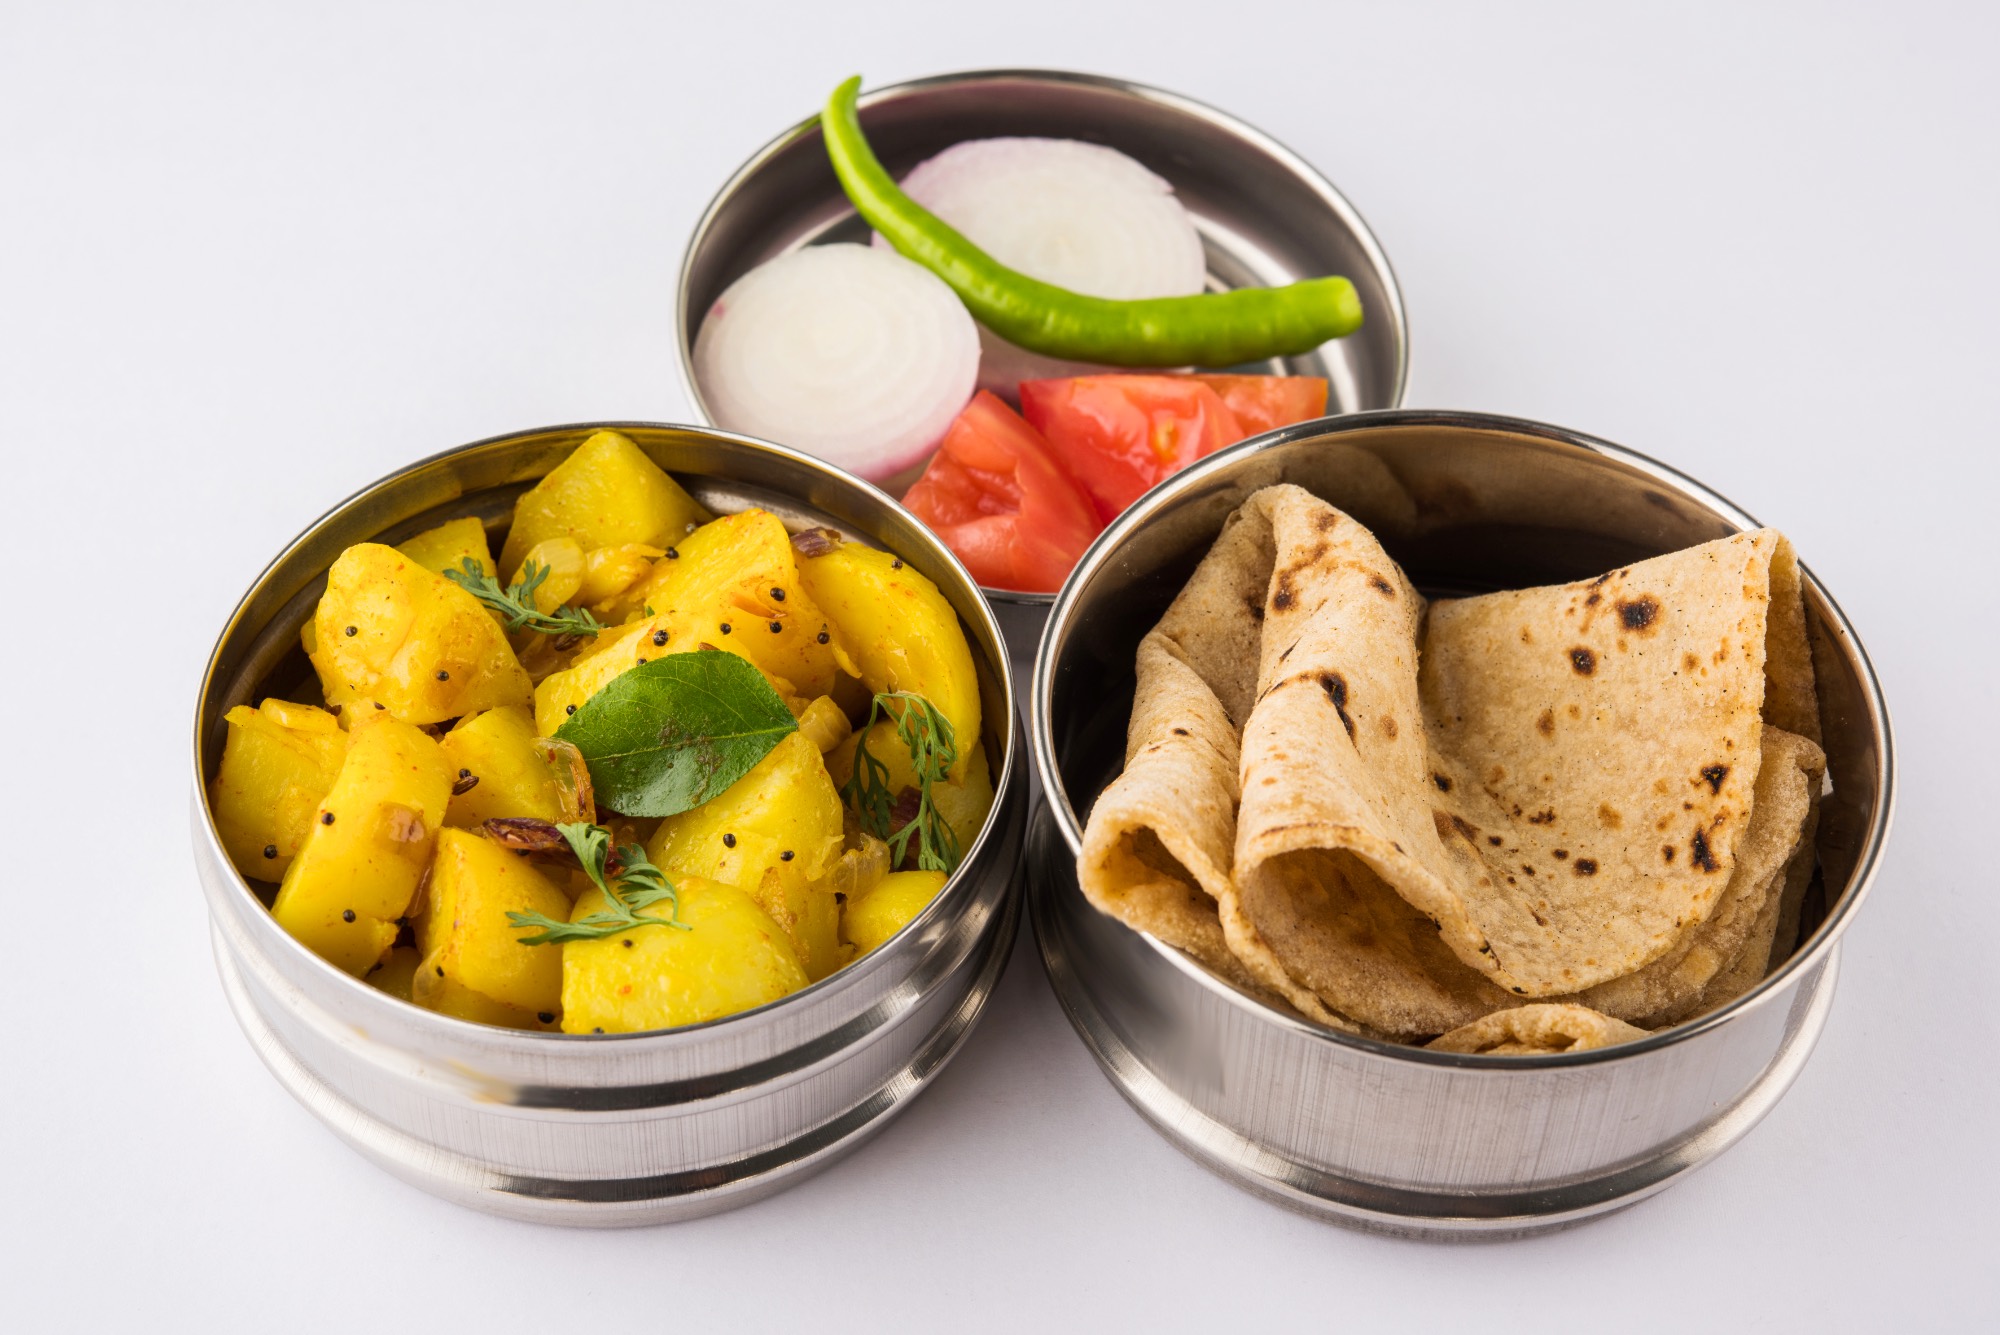 three round stainless steel containers containing food.